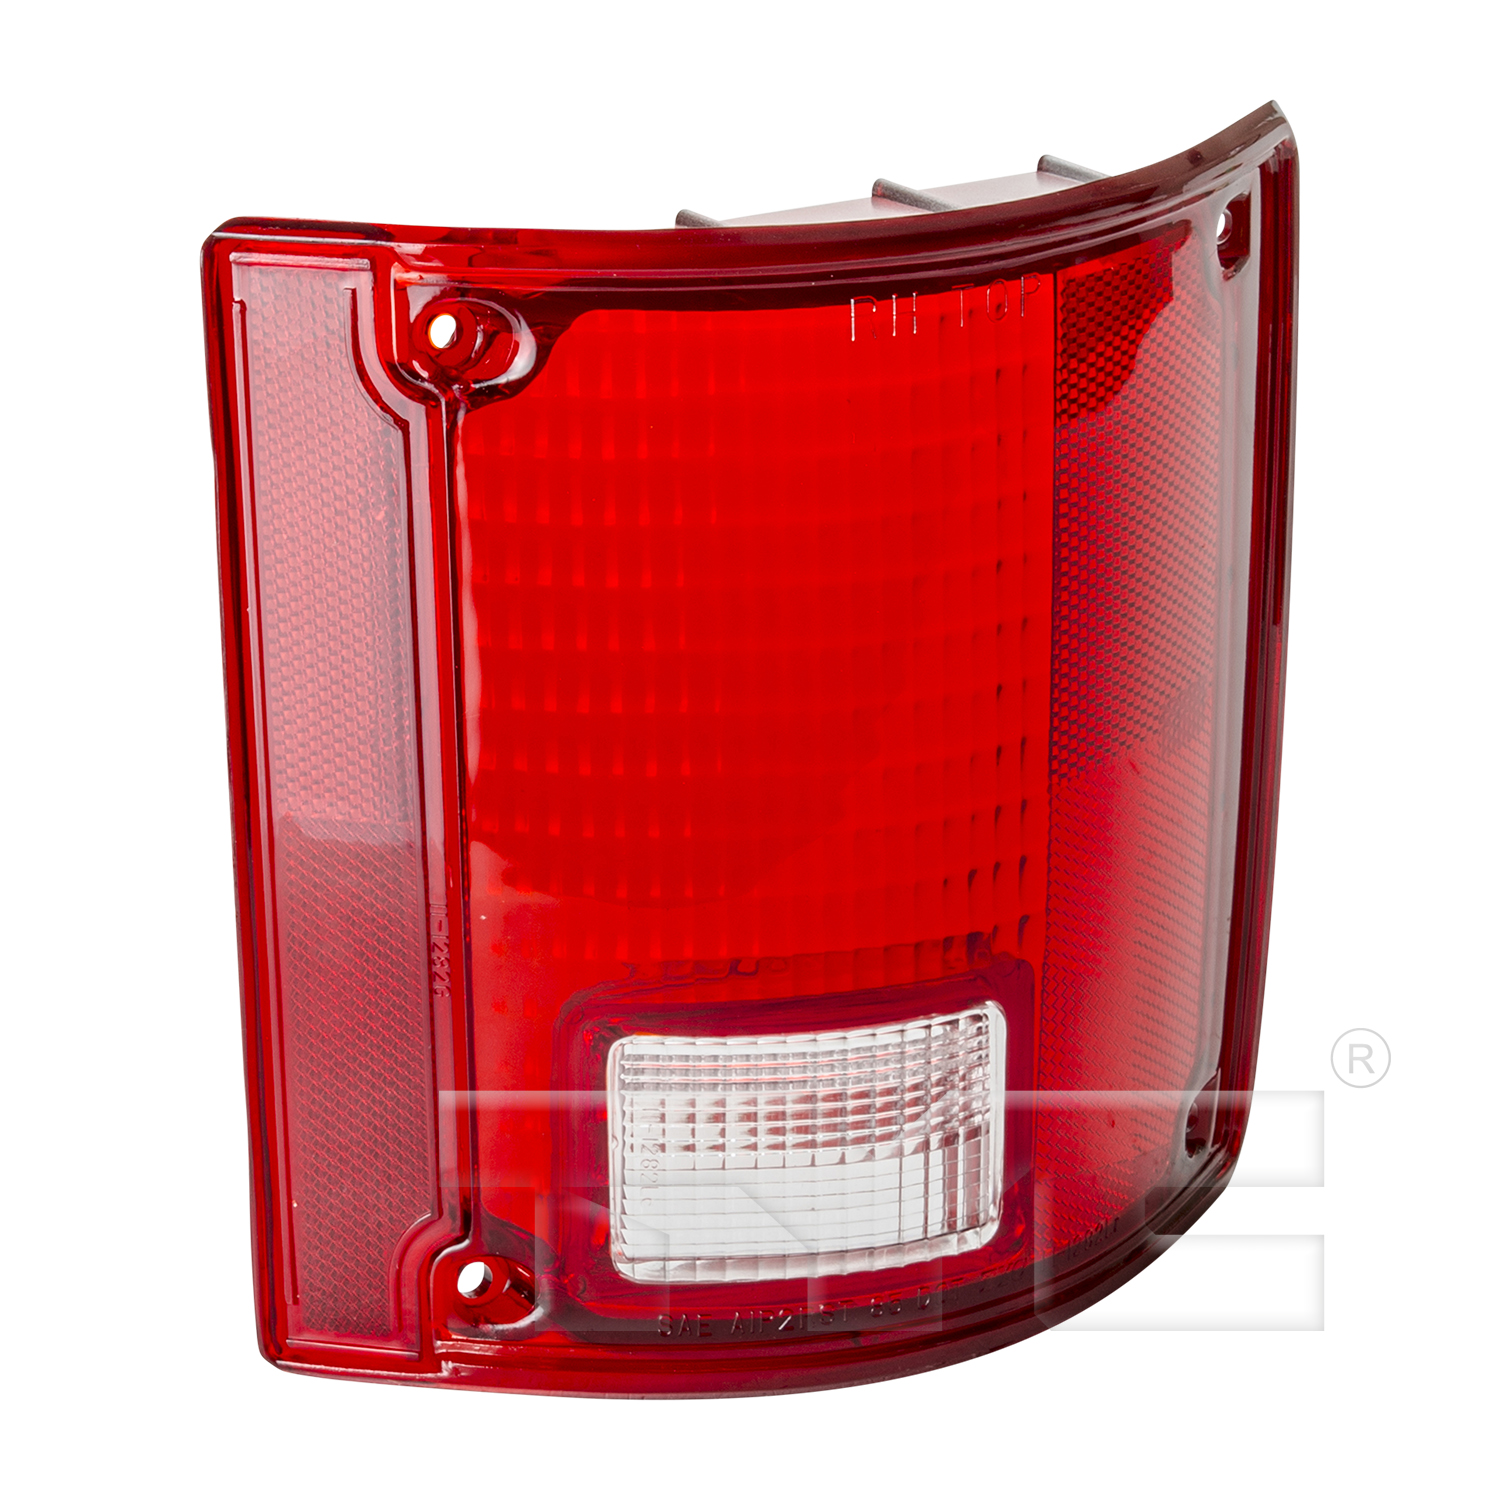 Aftermarket TAILLIGHTS for GMC - C15/C1500 PICKUP, C15/C1500 PICKUP,73-74,RT Taillamp lens